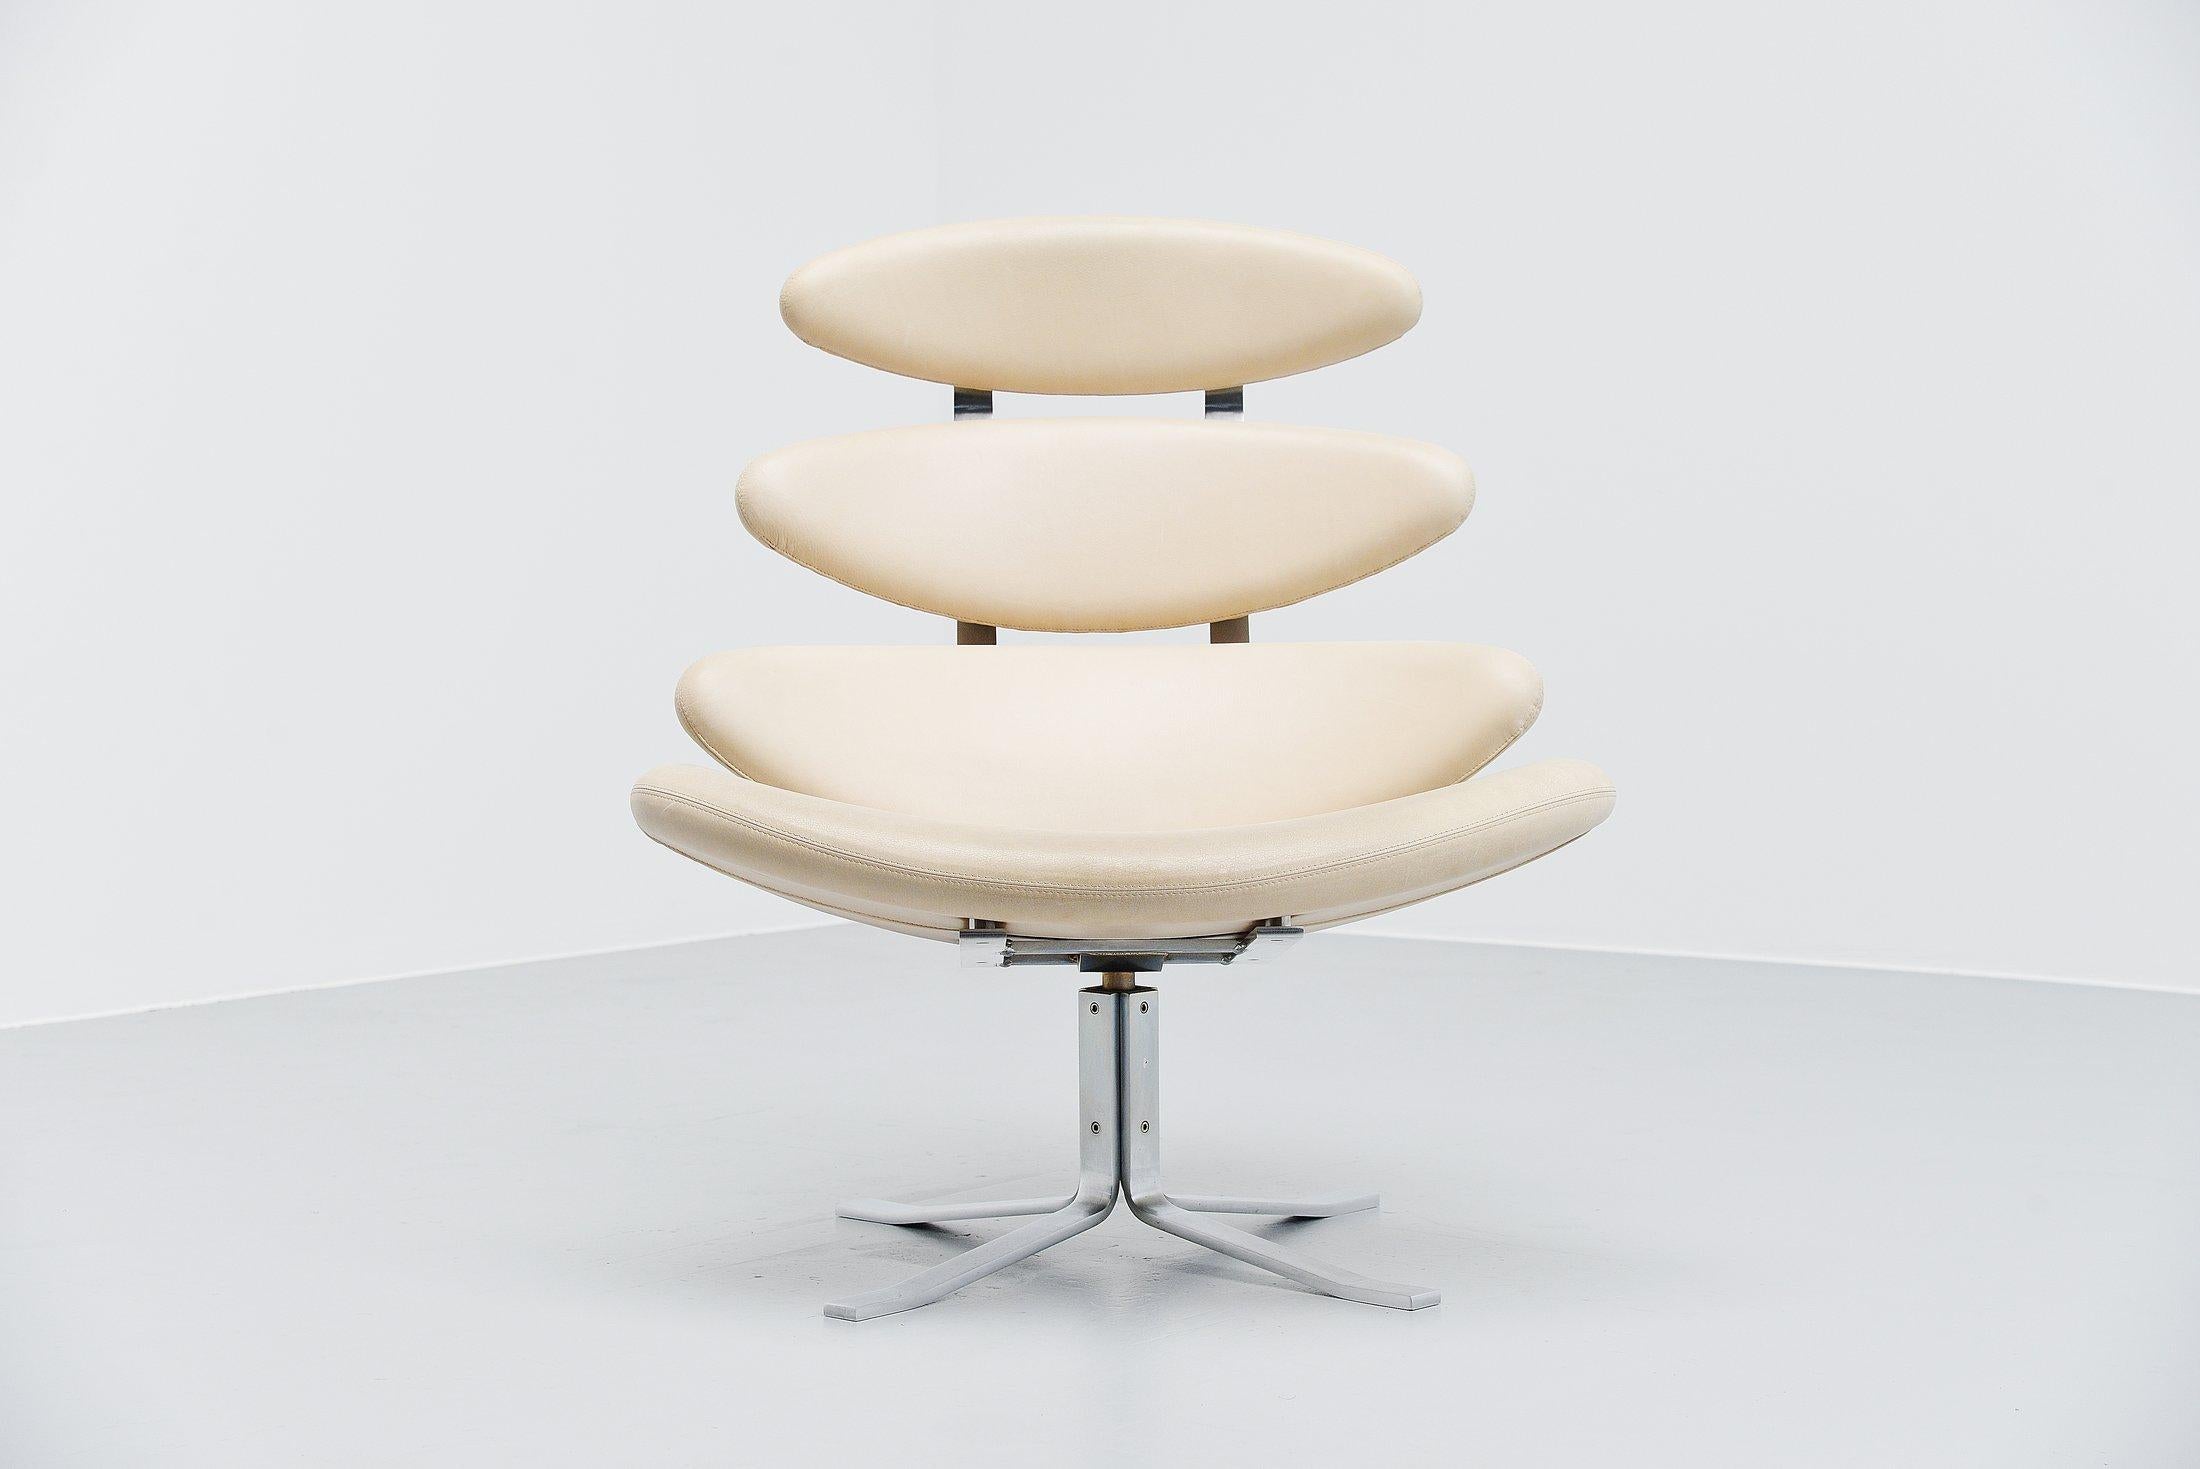 Very nice superb quality lounge chair designed by Poul M. Volther and manufactured by Erik Jorgensen, Denmark 1958. The chair was designed in 1958 but is still in production because this is just a timeless chair. This is a chair from the 1970s with